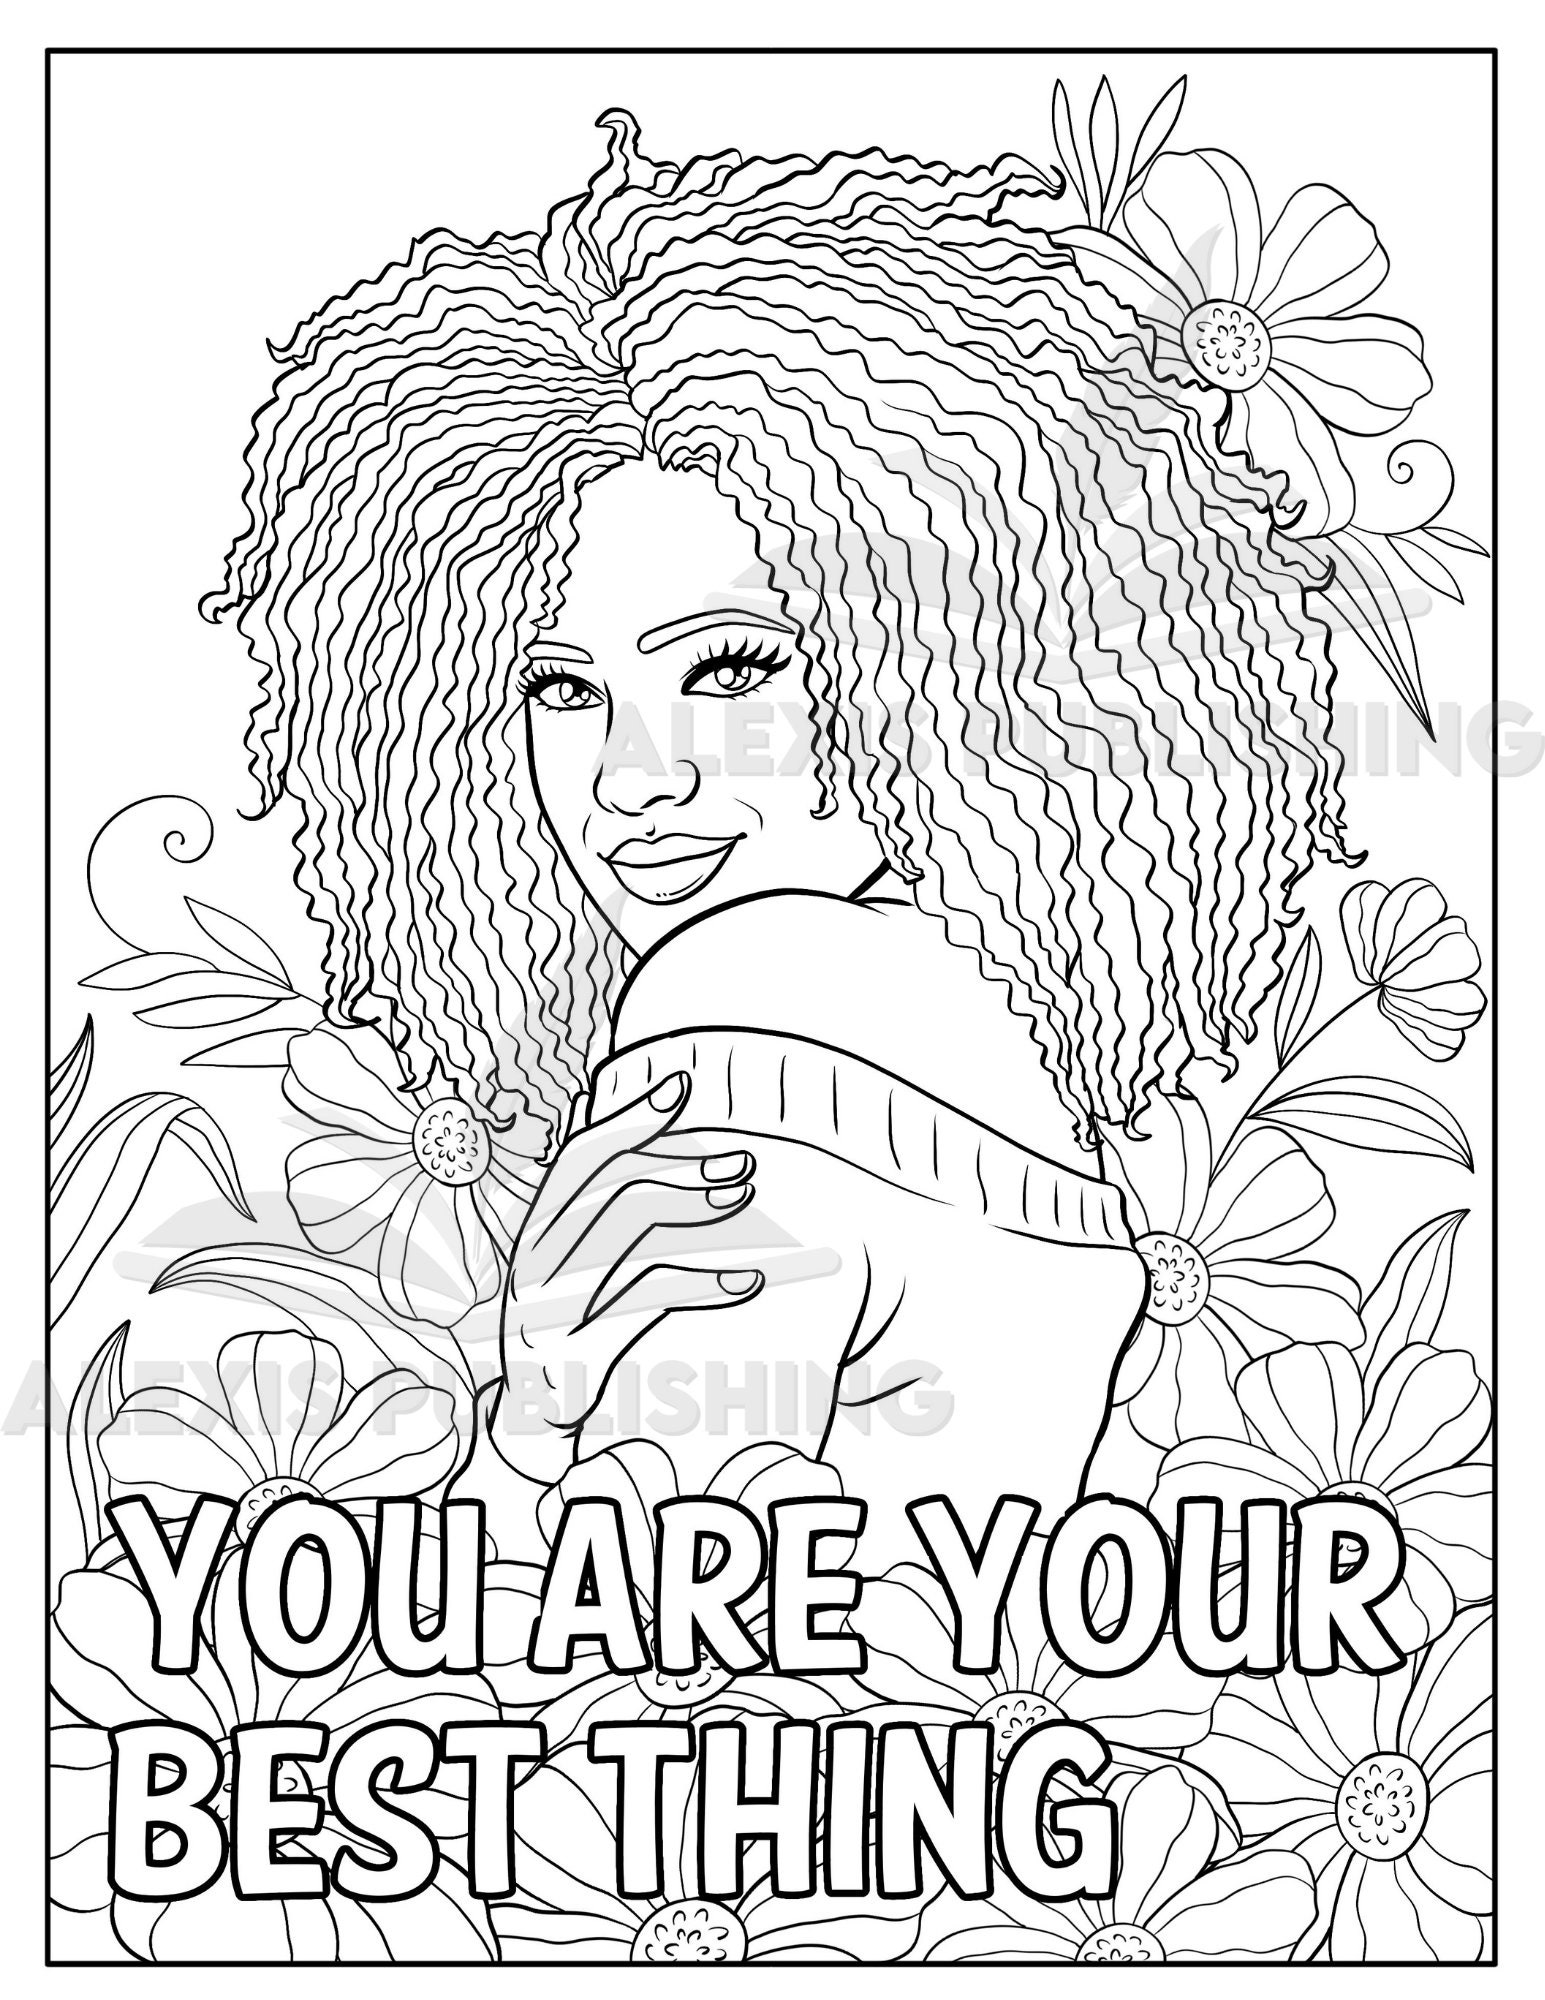 Good Vibes: Adult Coloring Book For Black Women